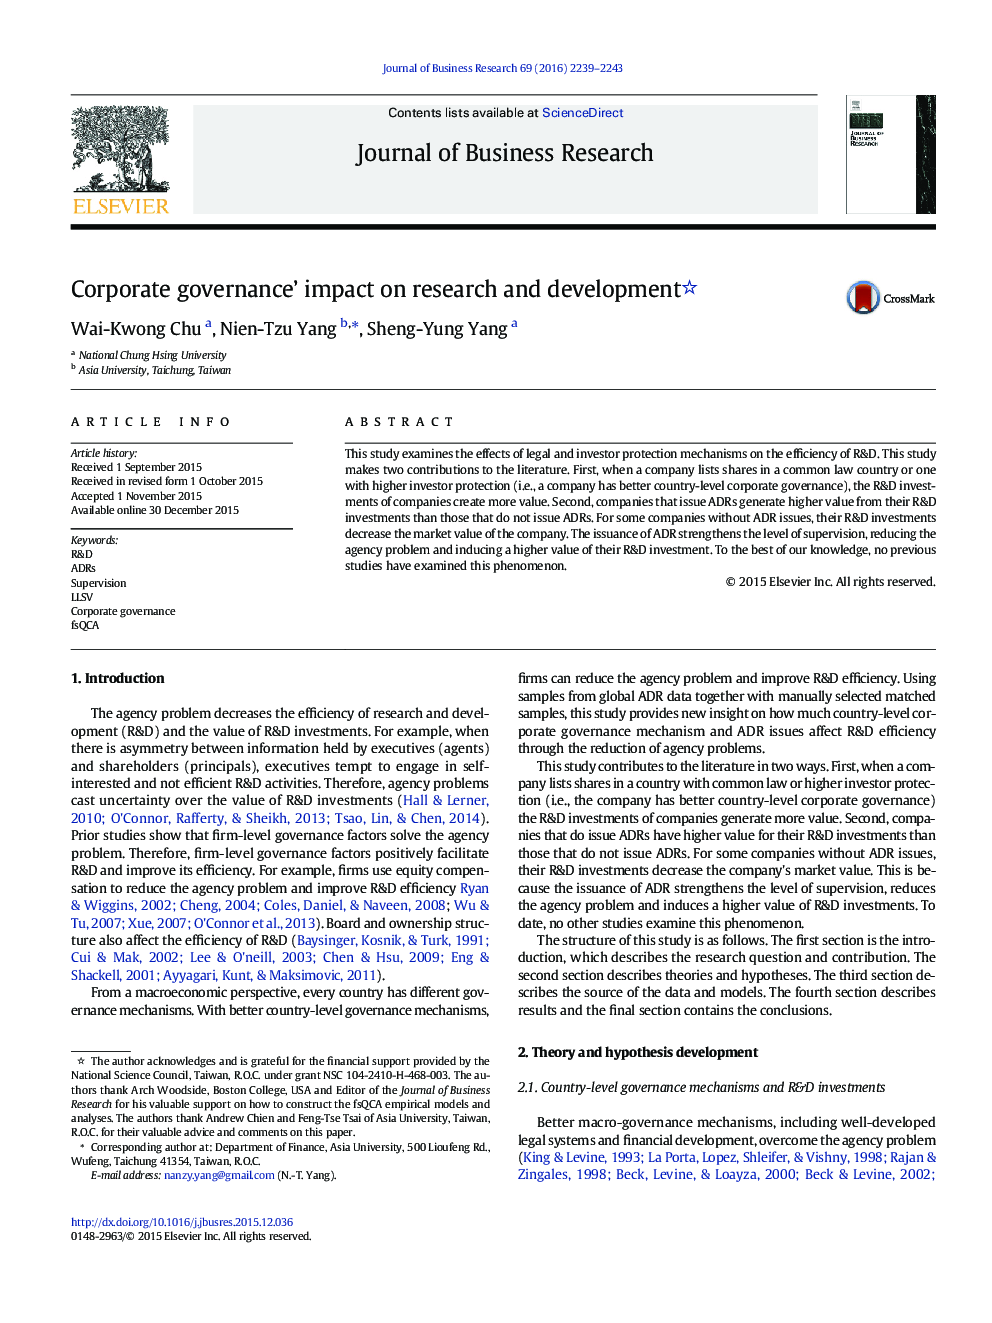 Corporate governance’ impact on research and development 